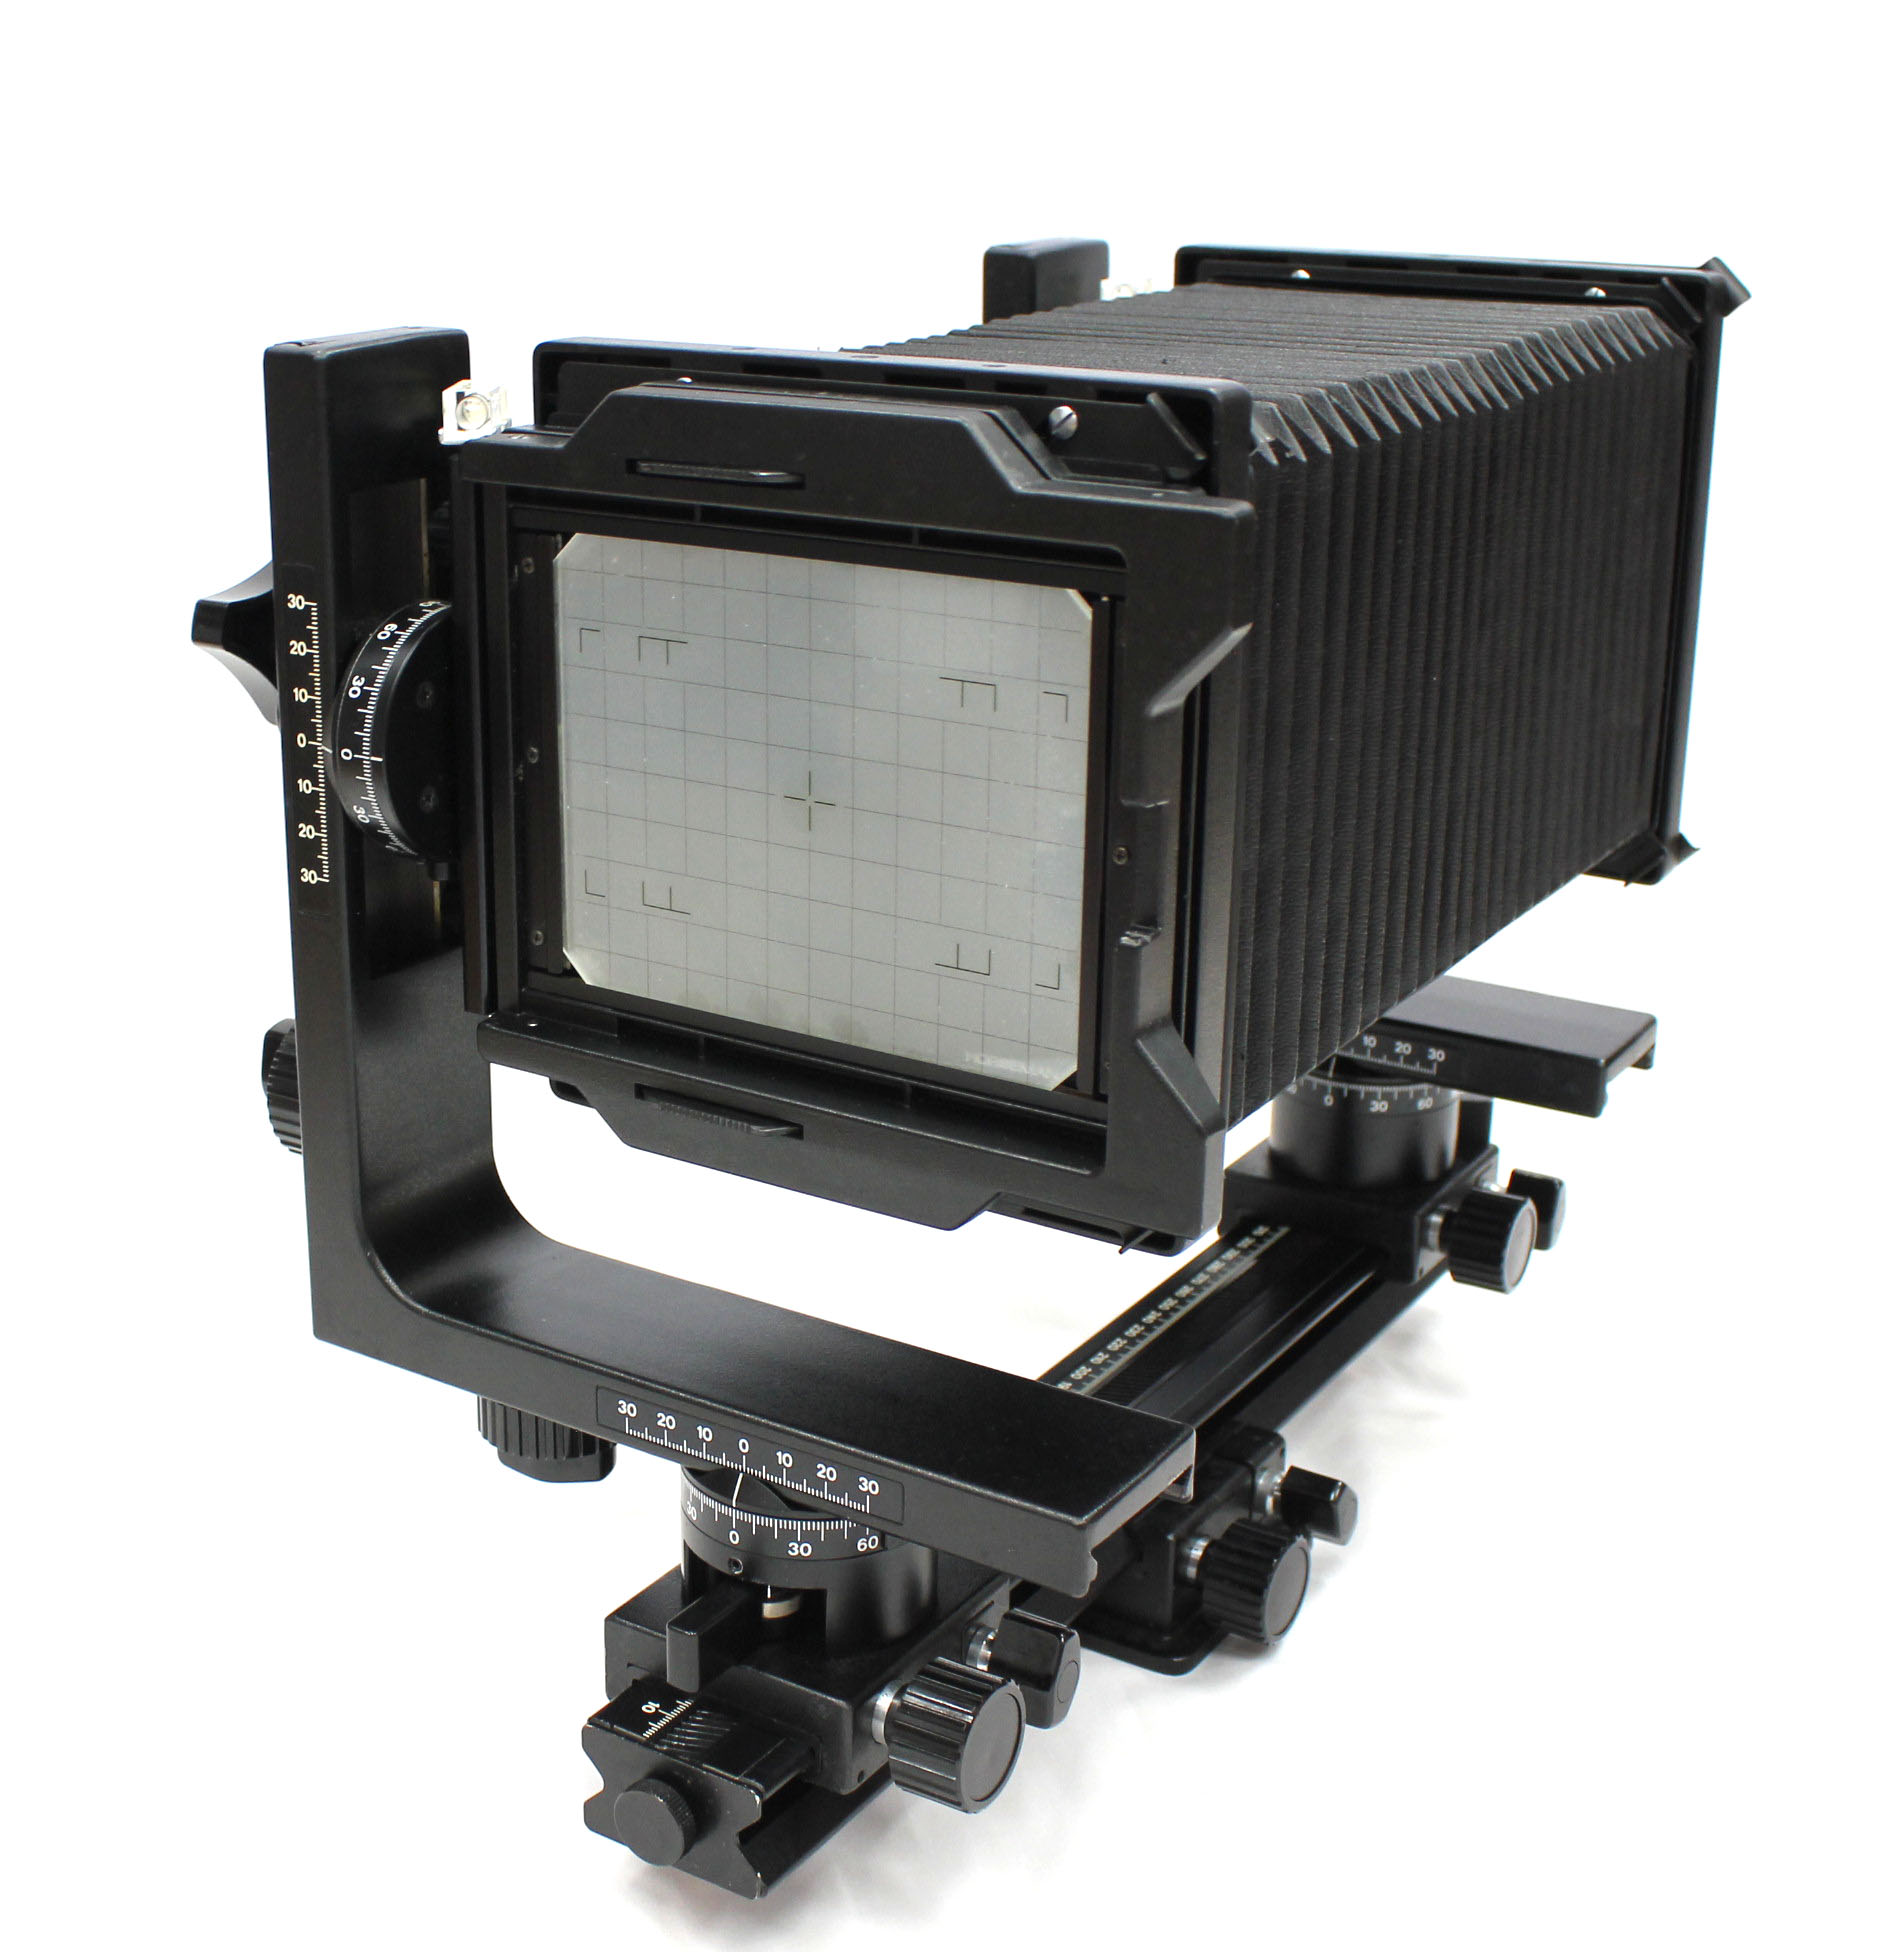 Horseman L45 4x5 Large Format View Type Monorail Camera with 3 Cut Film Holders from Japan Photo 1